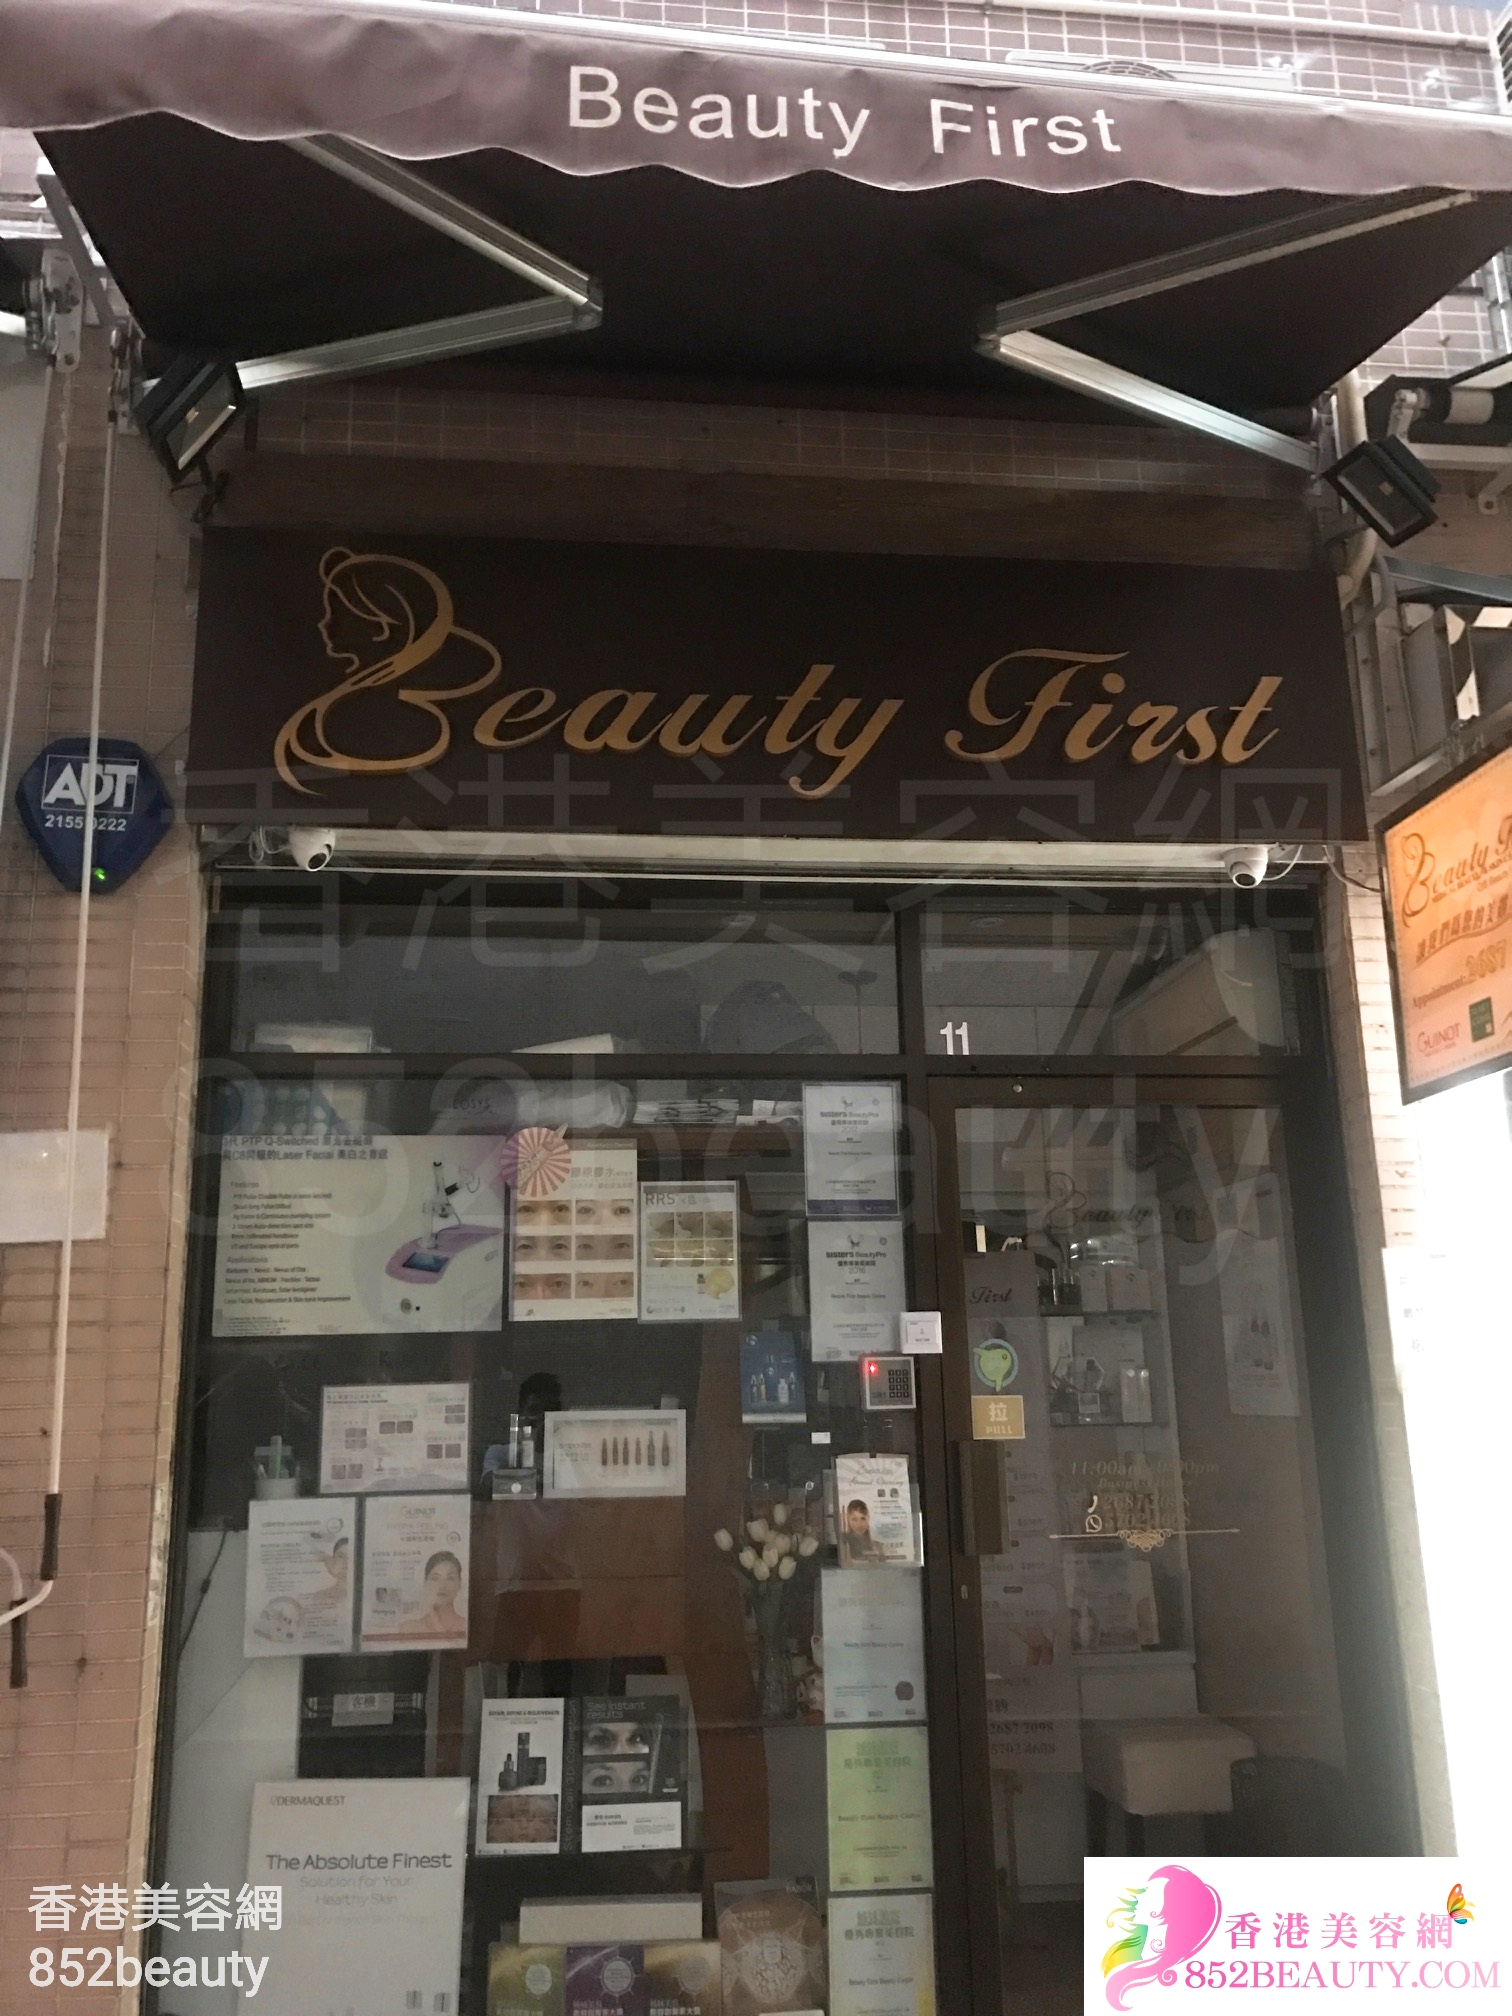 Hand and foot care: Beauty First (嘉豐花園)